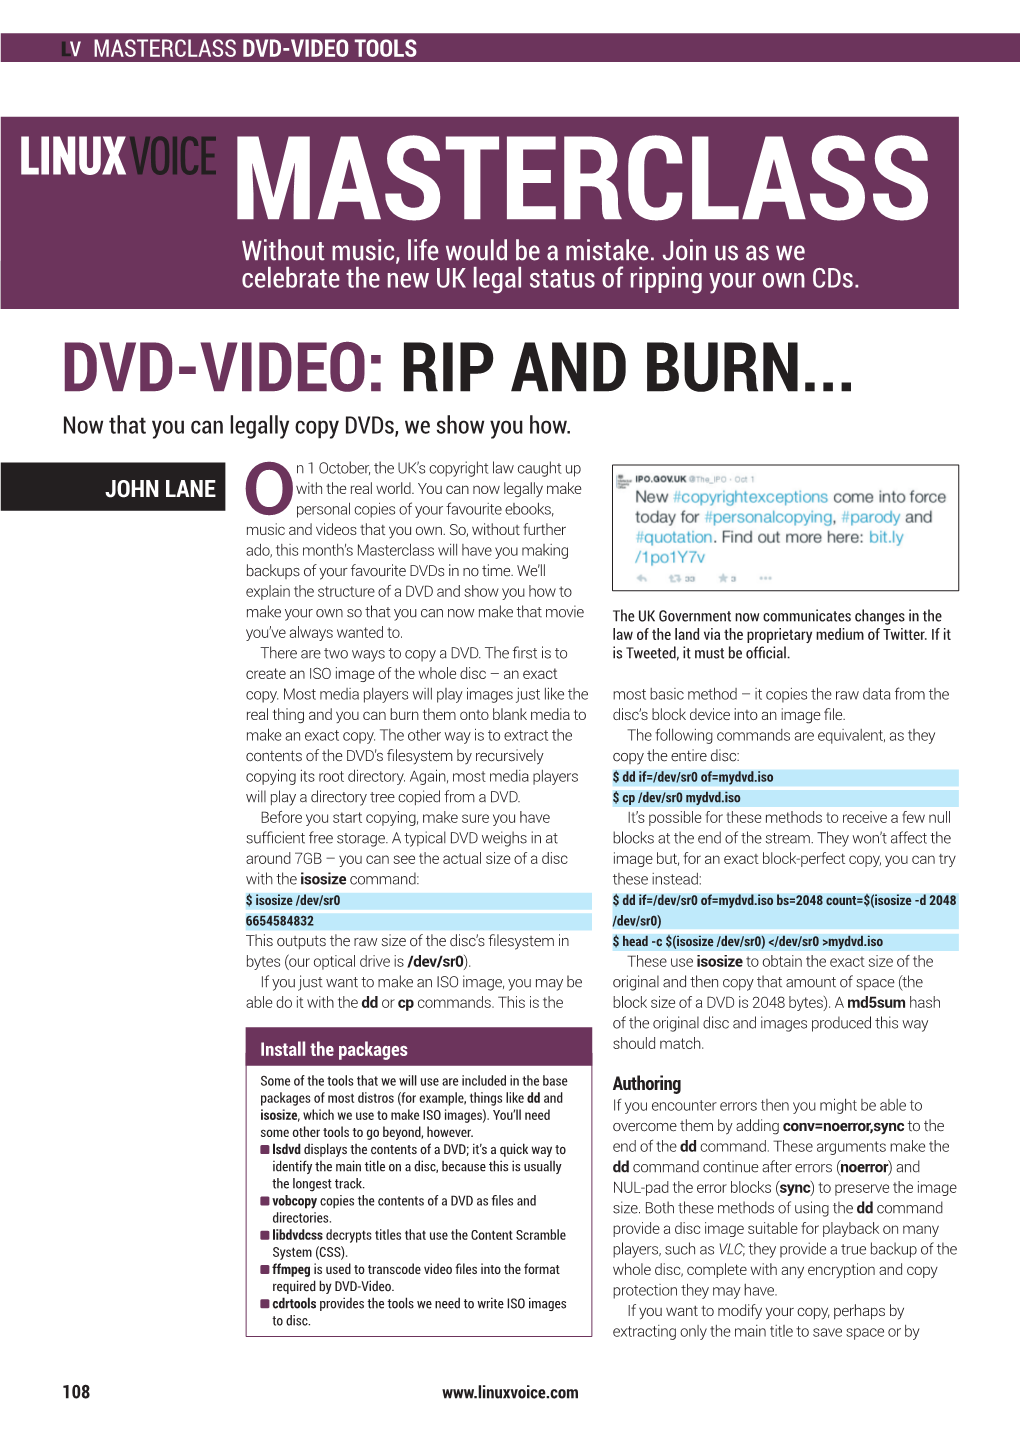 MASTERCLASS DVD-VIDEO TOOLS MASTERCLASS Without Music, Life Would Be a Mistake